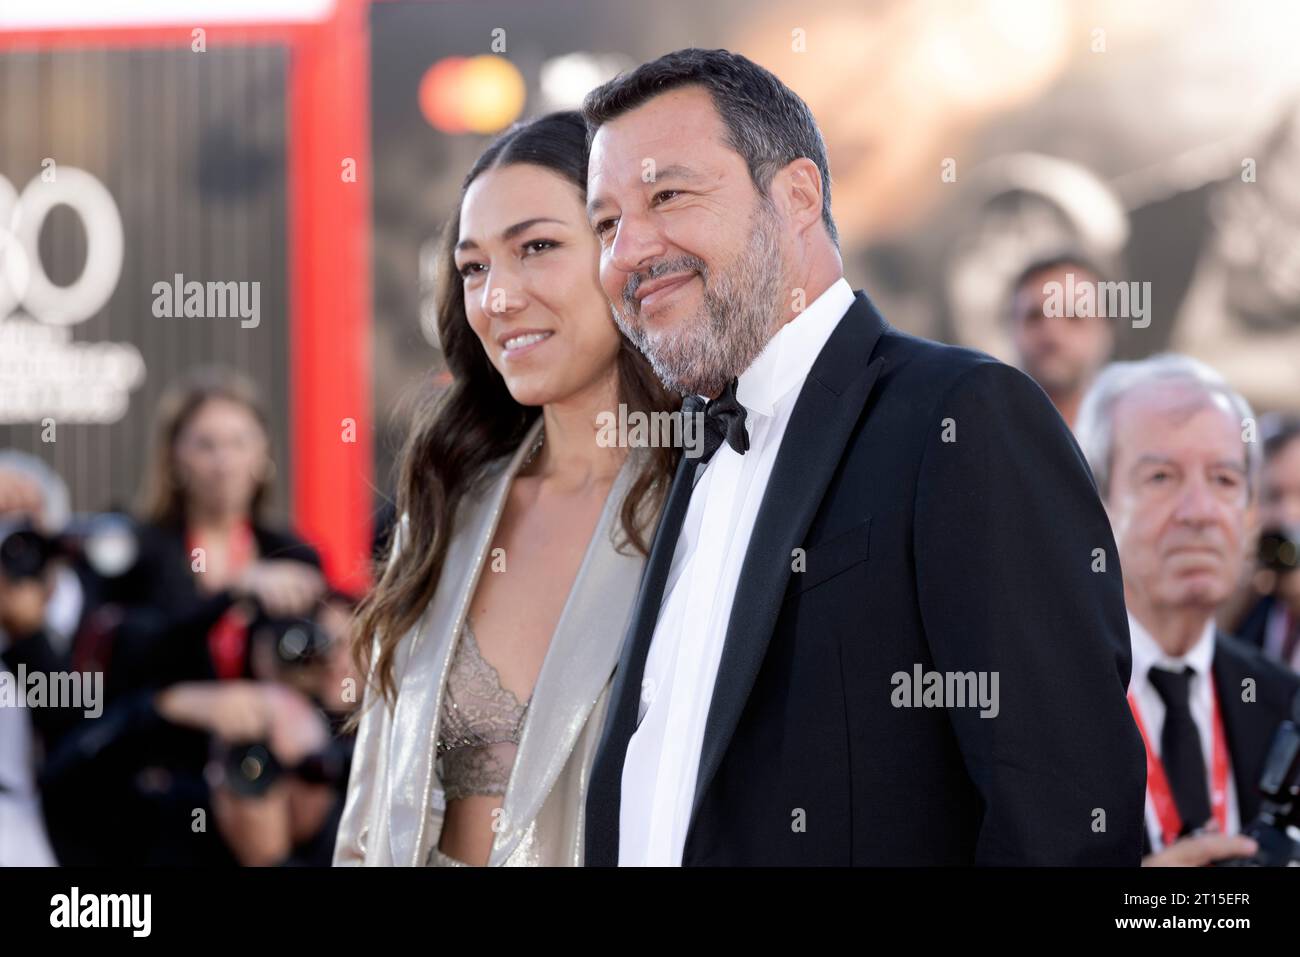 VENICE, ITALY - AUGUST 30: Francesca Verdini and Matteo Salvini attends the opening red carpet at the 80th Venice International Film Festival on Augus Stock Photo